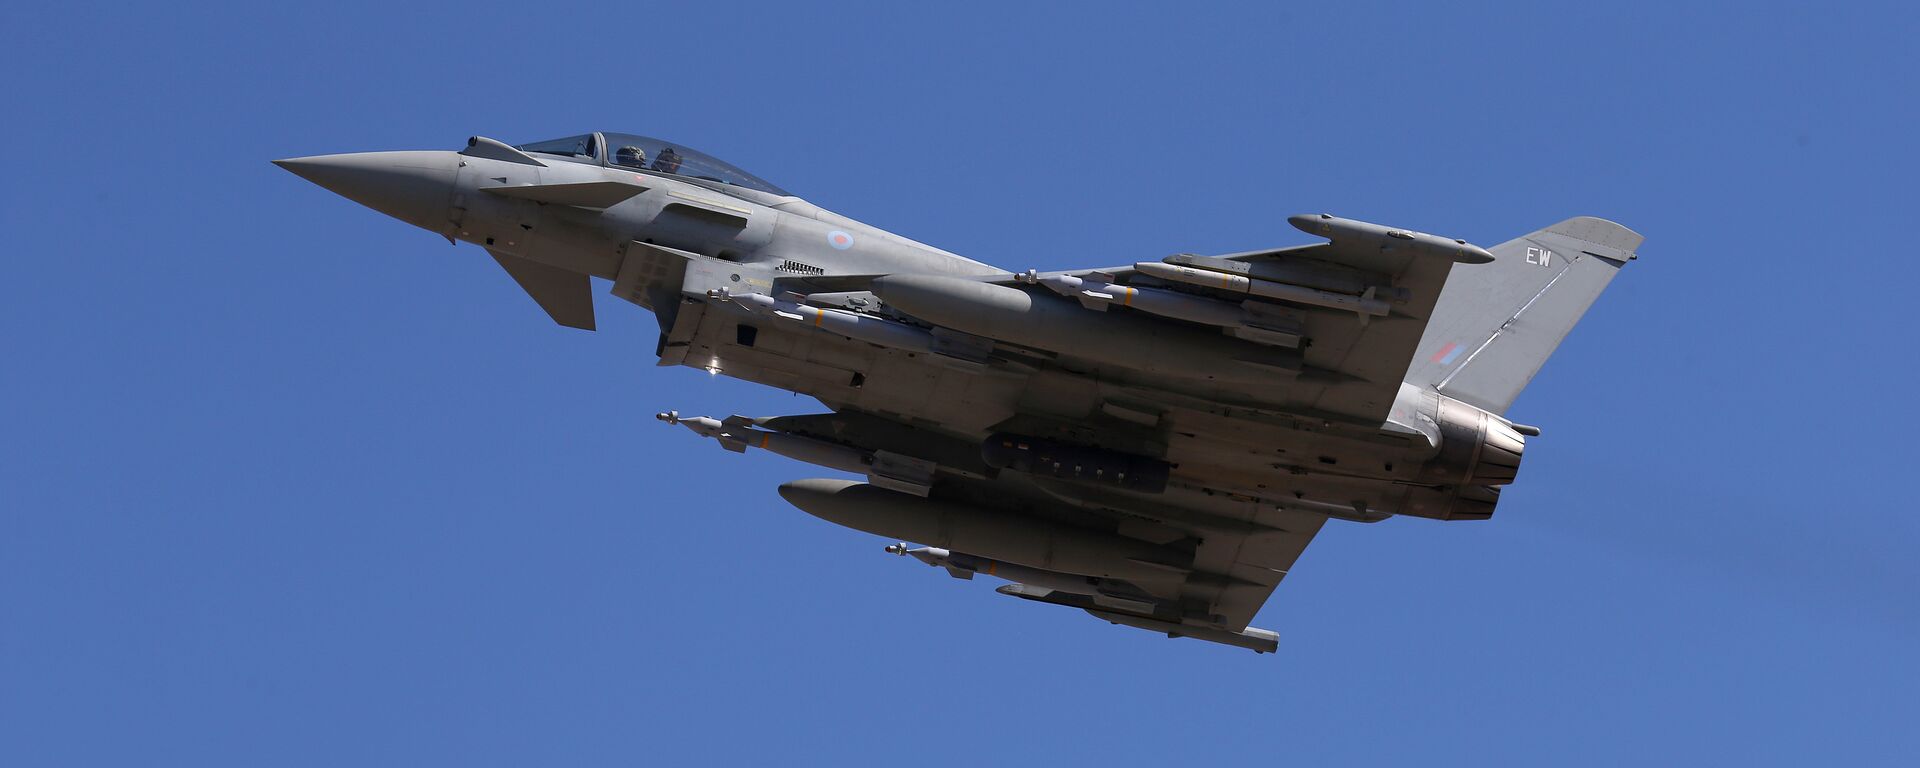 In this Thursday, Sept. 22, 2016, a Typhoon aircraft takes off from RAF, Akrotiri, Cyprus. British air forces for a mission in Iraq. British Tornado and Typhoon aircraft stationed at a U.K. air base in Cyprus are pounding Islamic State targets - Sputnik International, 1920, 16.08.2021